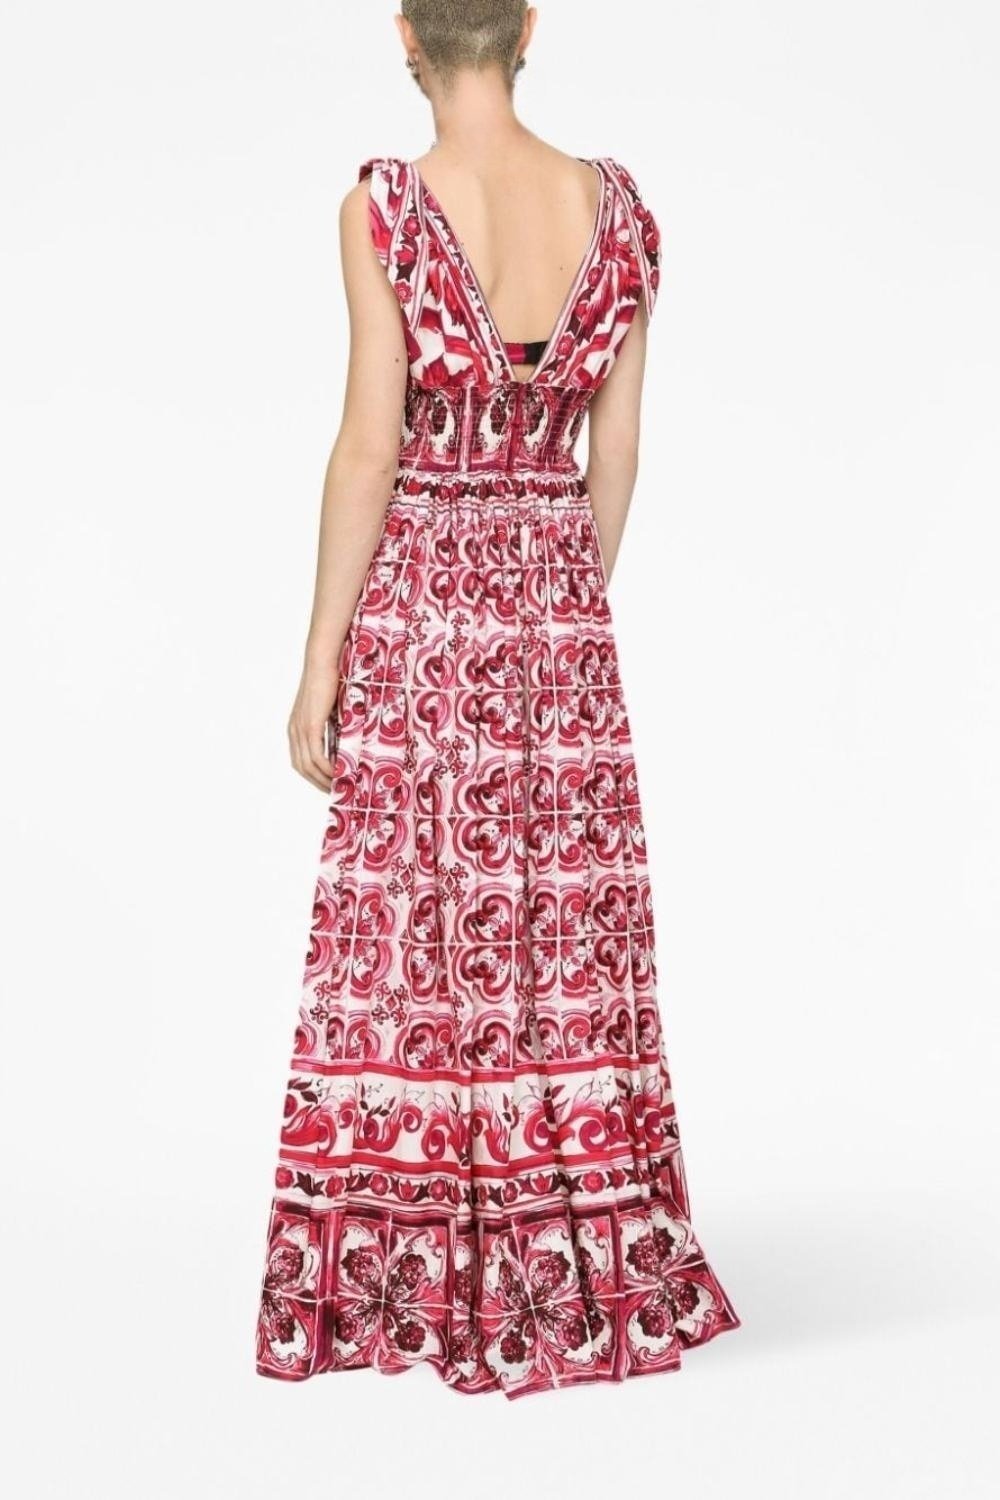 dresses-Sibyl Printed Knotted Strap Maxi Dress-SD0020627643-Red-S - Sunfere